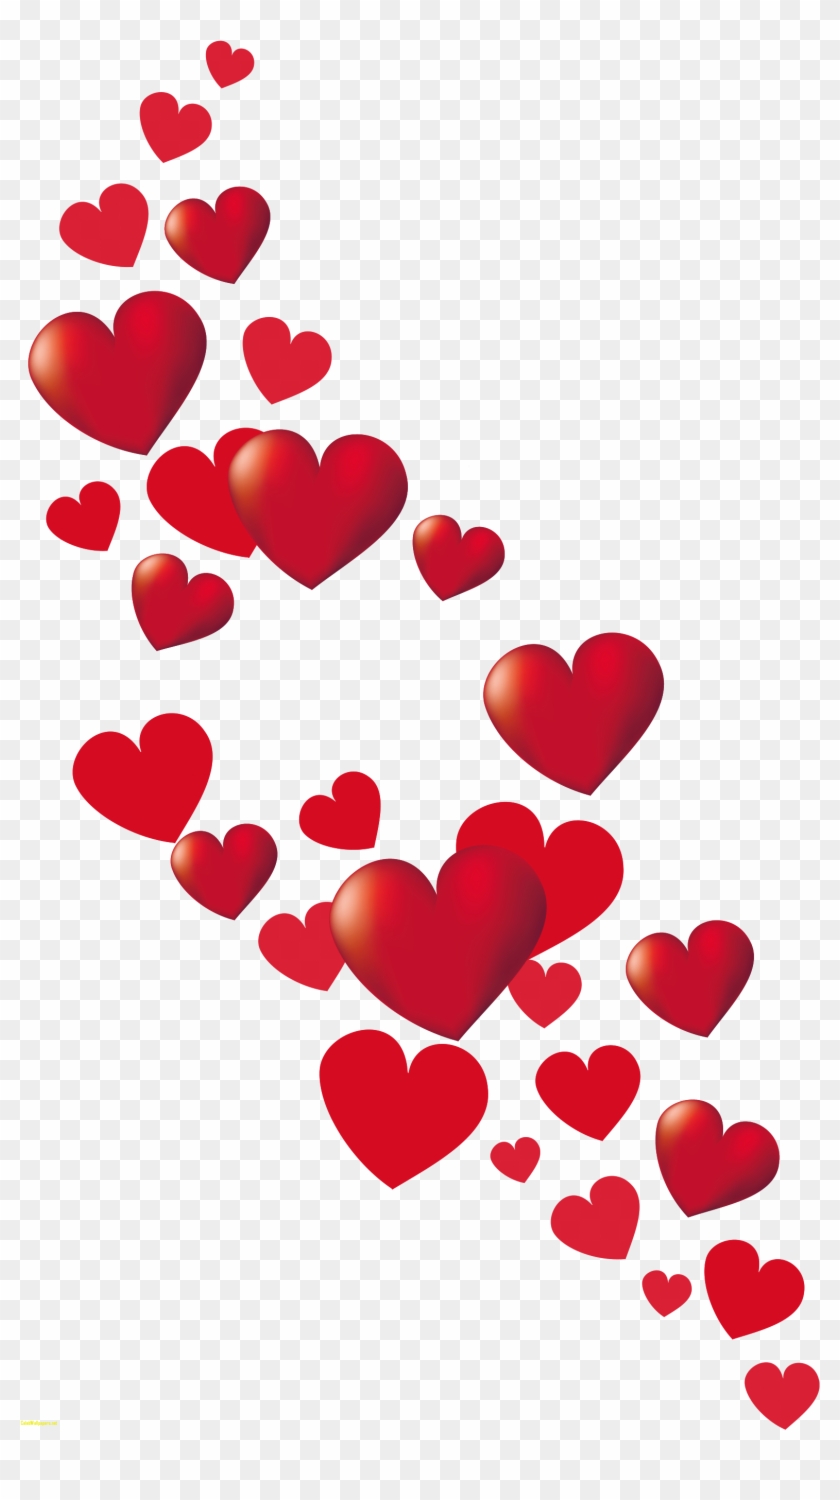 Images Of Hearts Fresh Free Clipart Valentines Hearts - Valentine Png #1159975